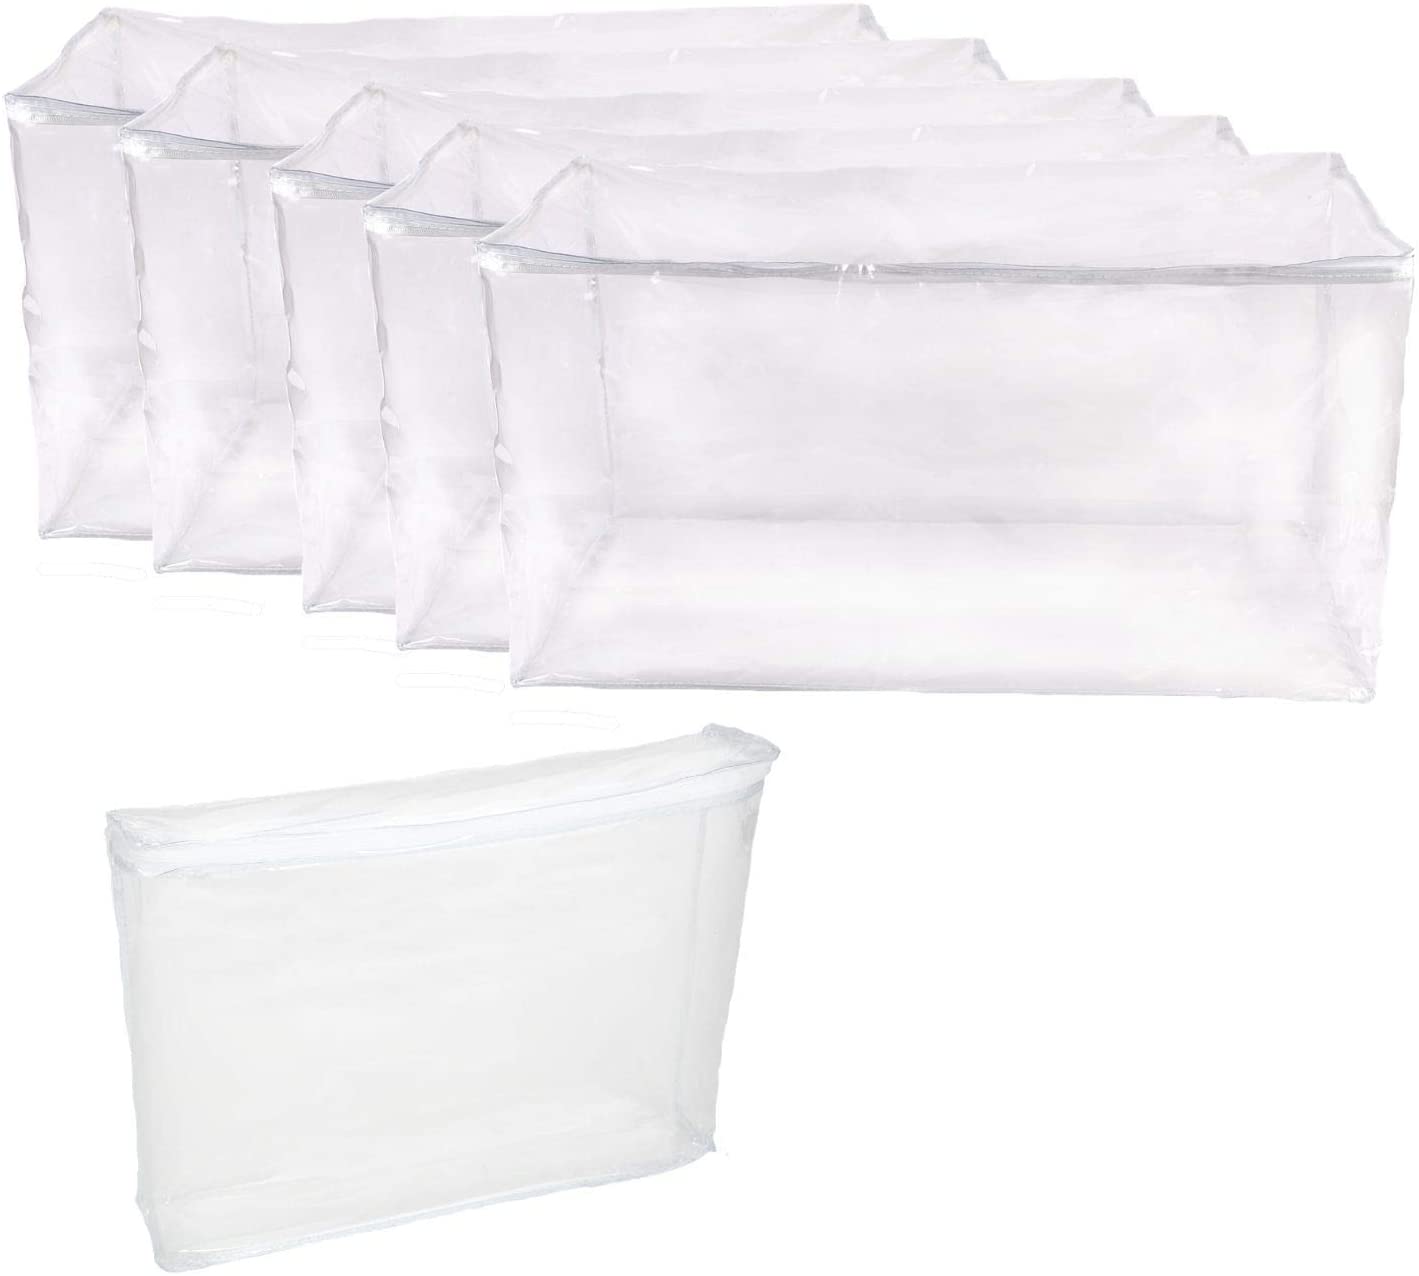 10-Pack Heavy Duty Vinyl Zippered Storage Bags Clear 9